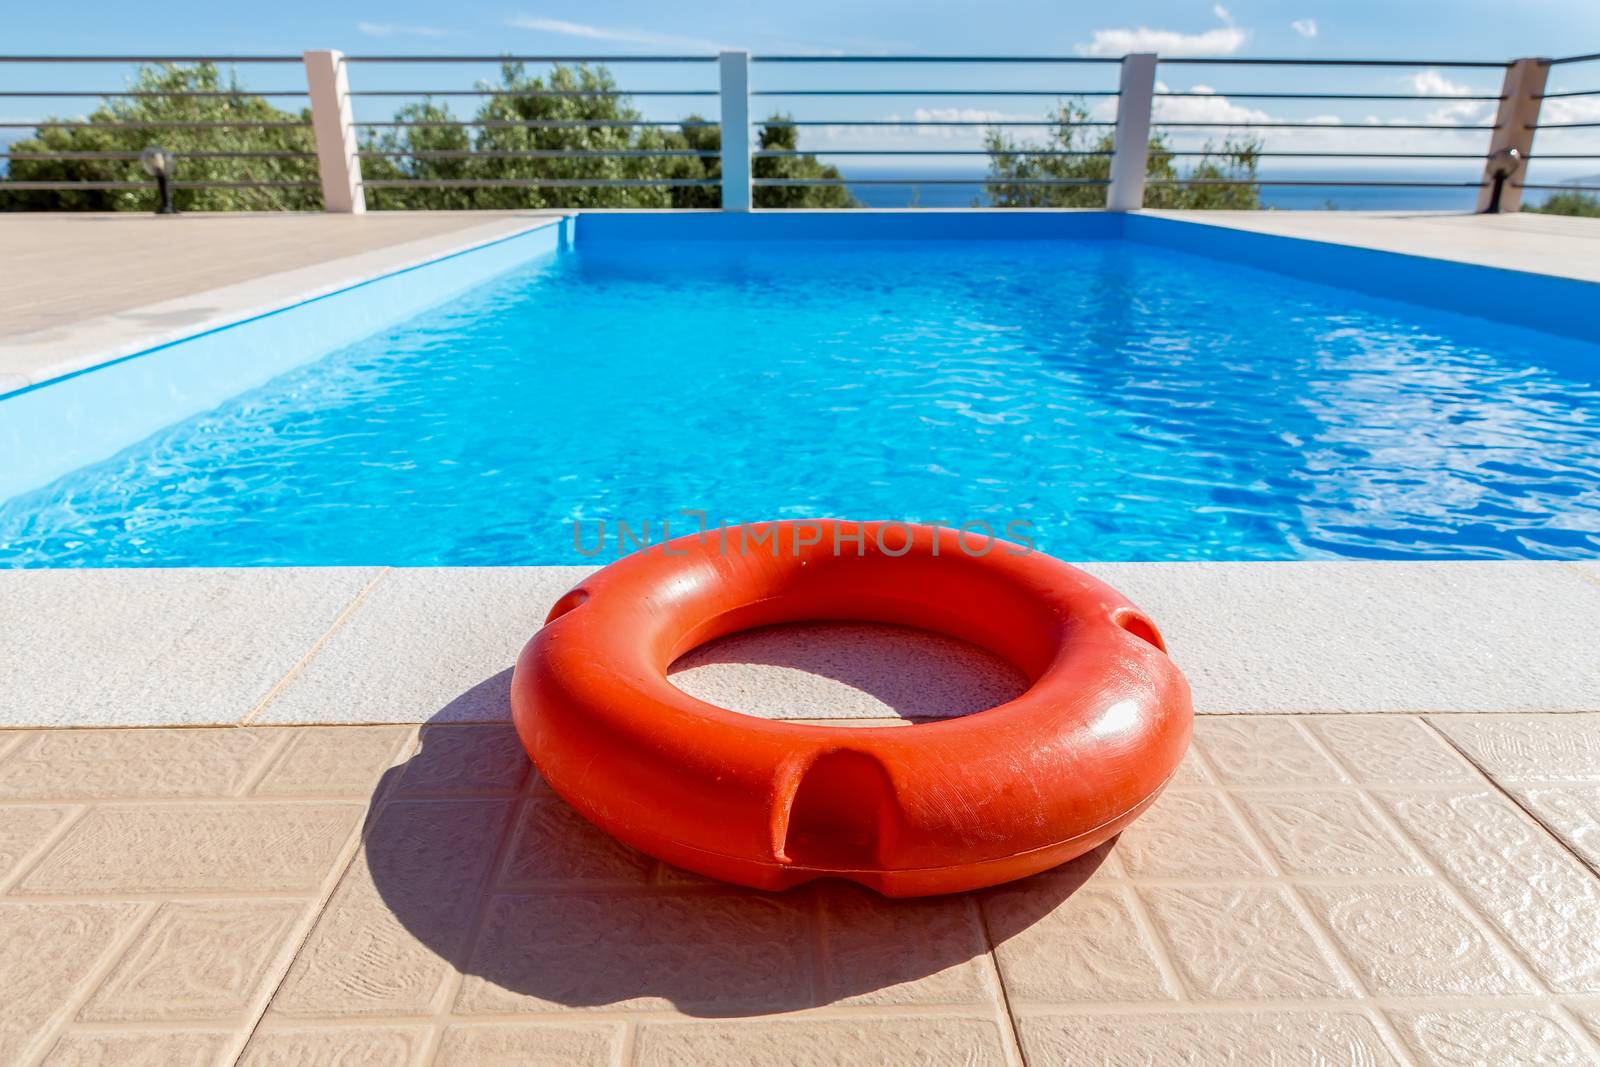 Orange life buoy at blue swimming pool by BenSchonewille